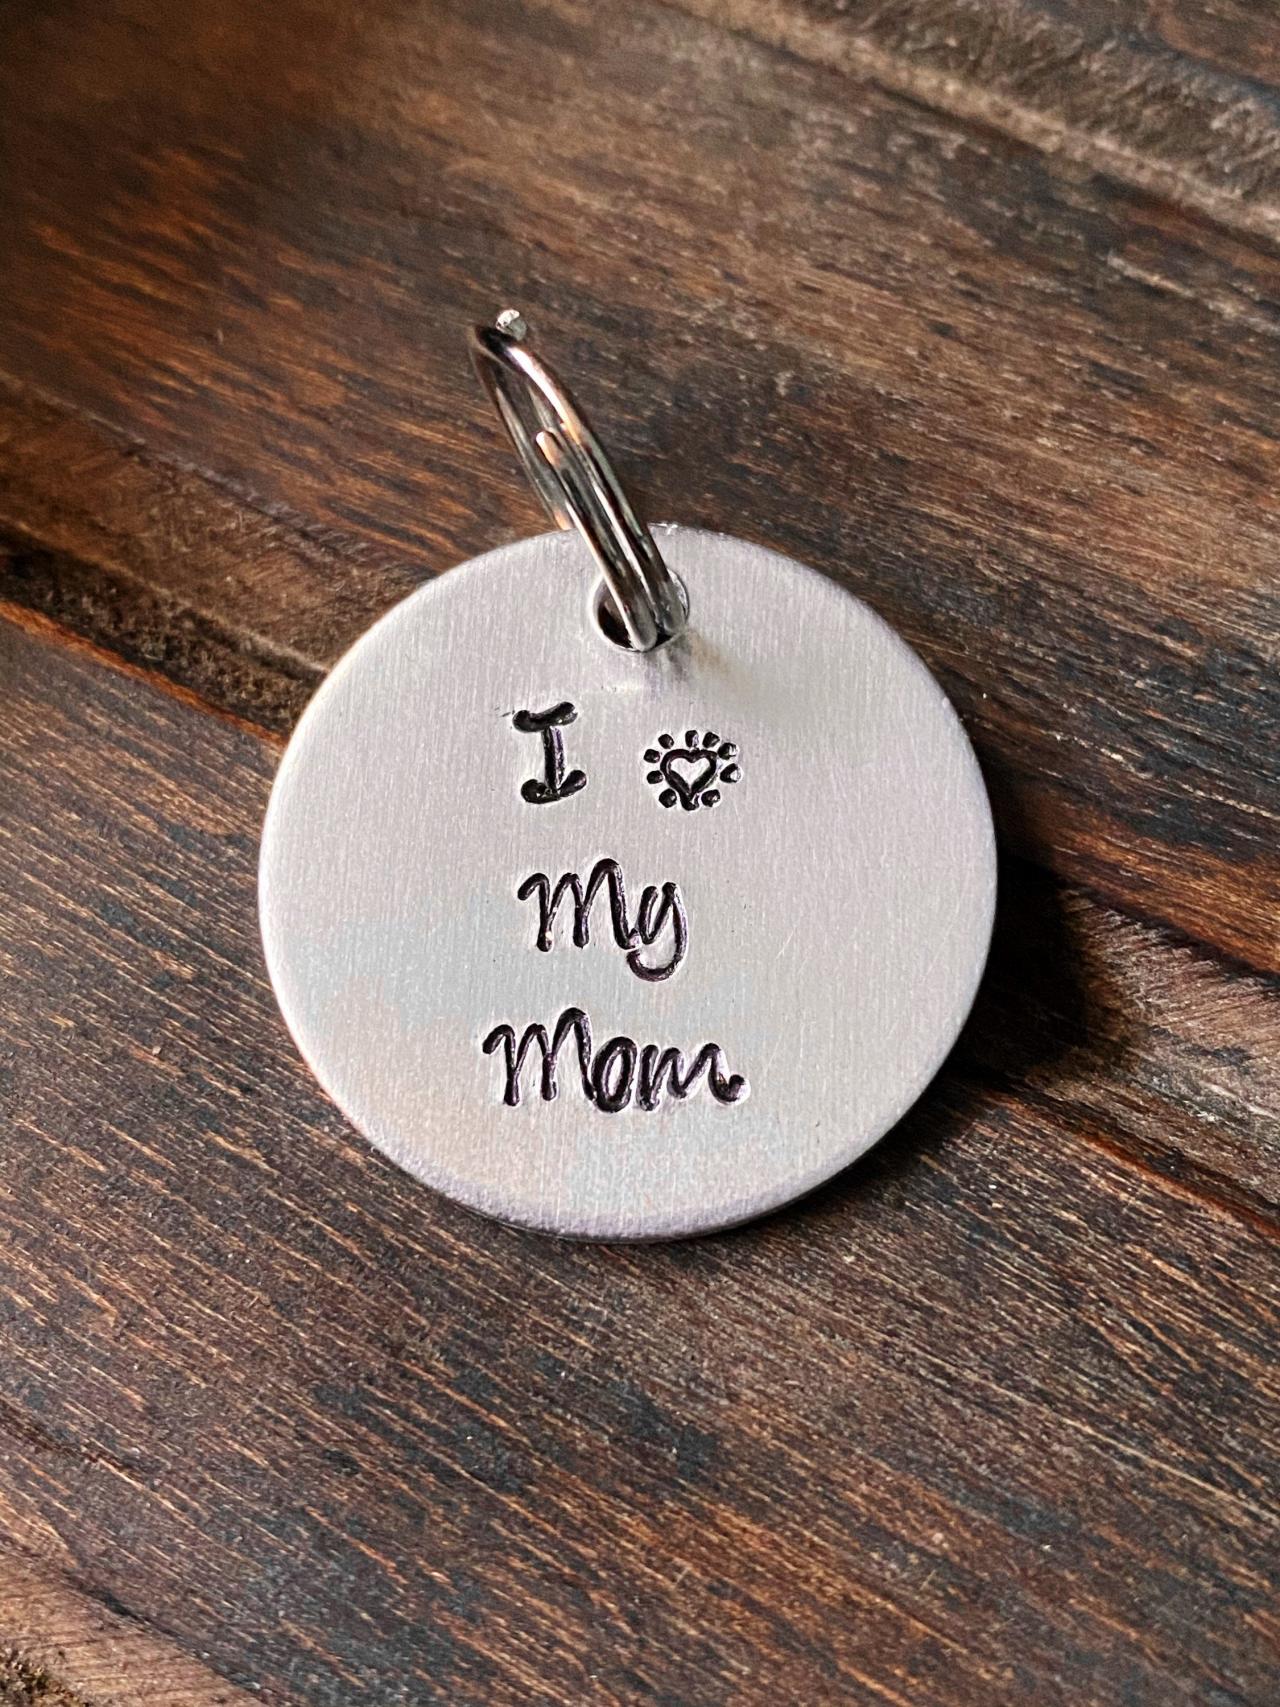 DOG OR CAT tag, “I heart My Mom” tag, Hand Stamped, Collar tag